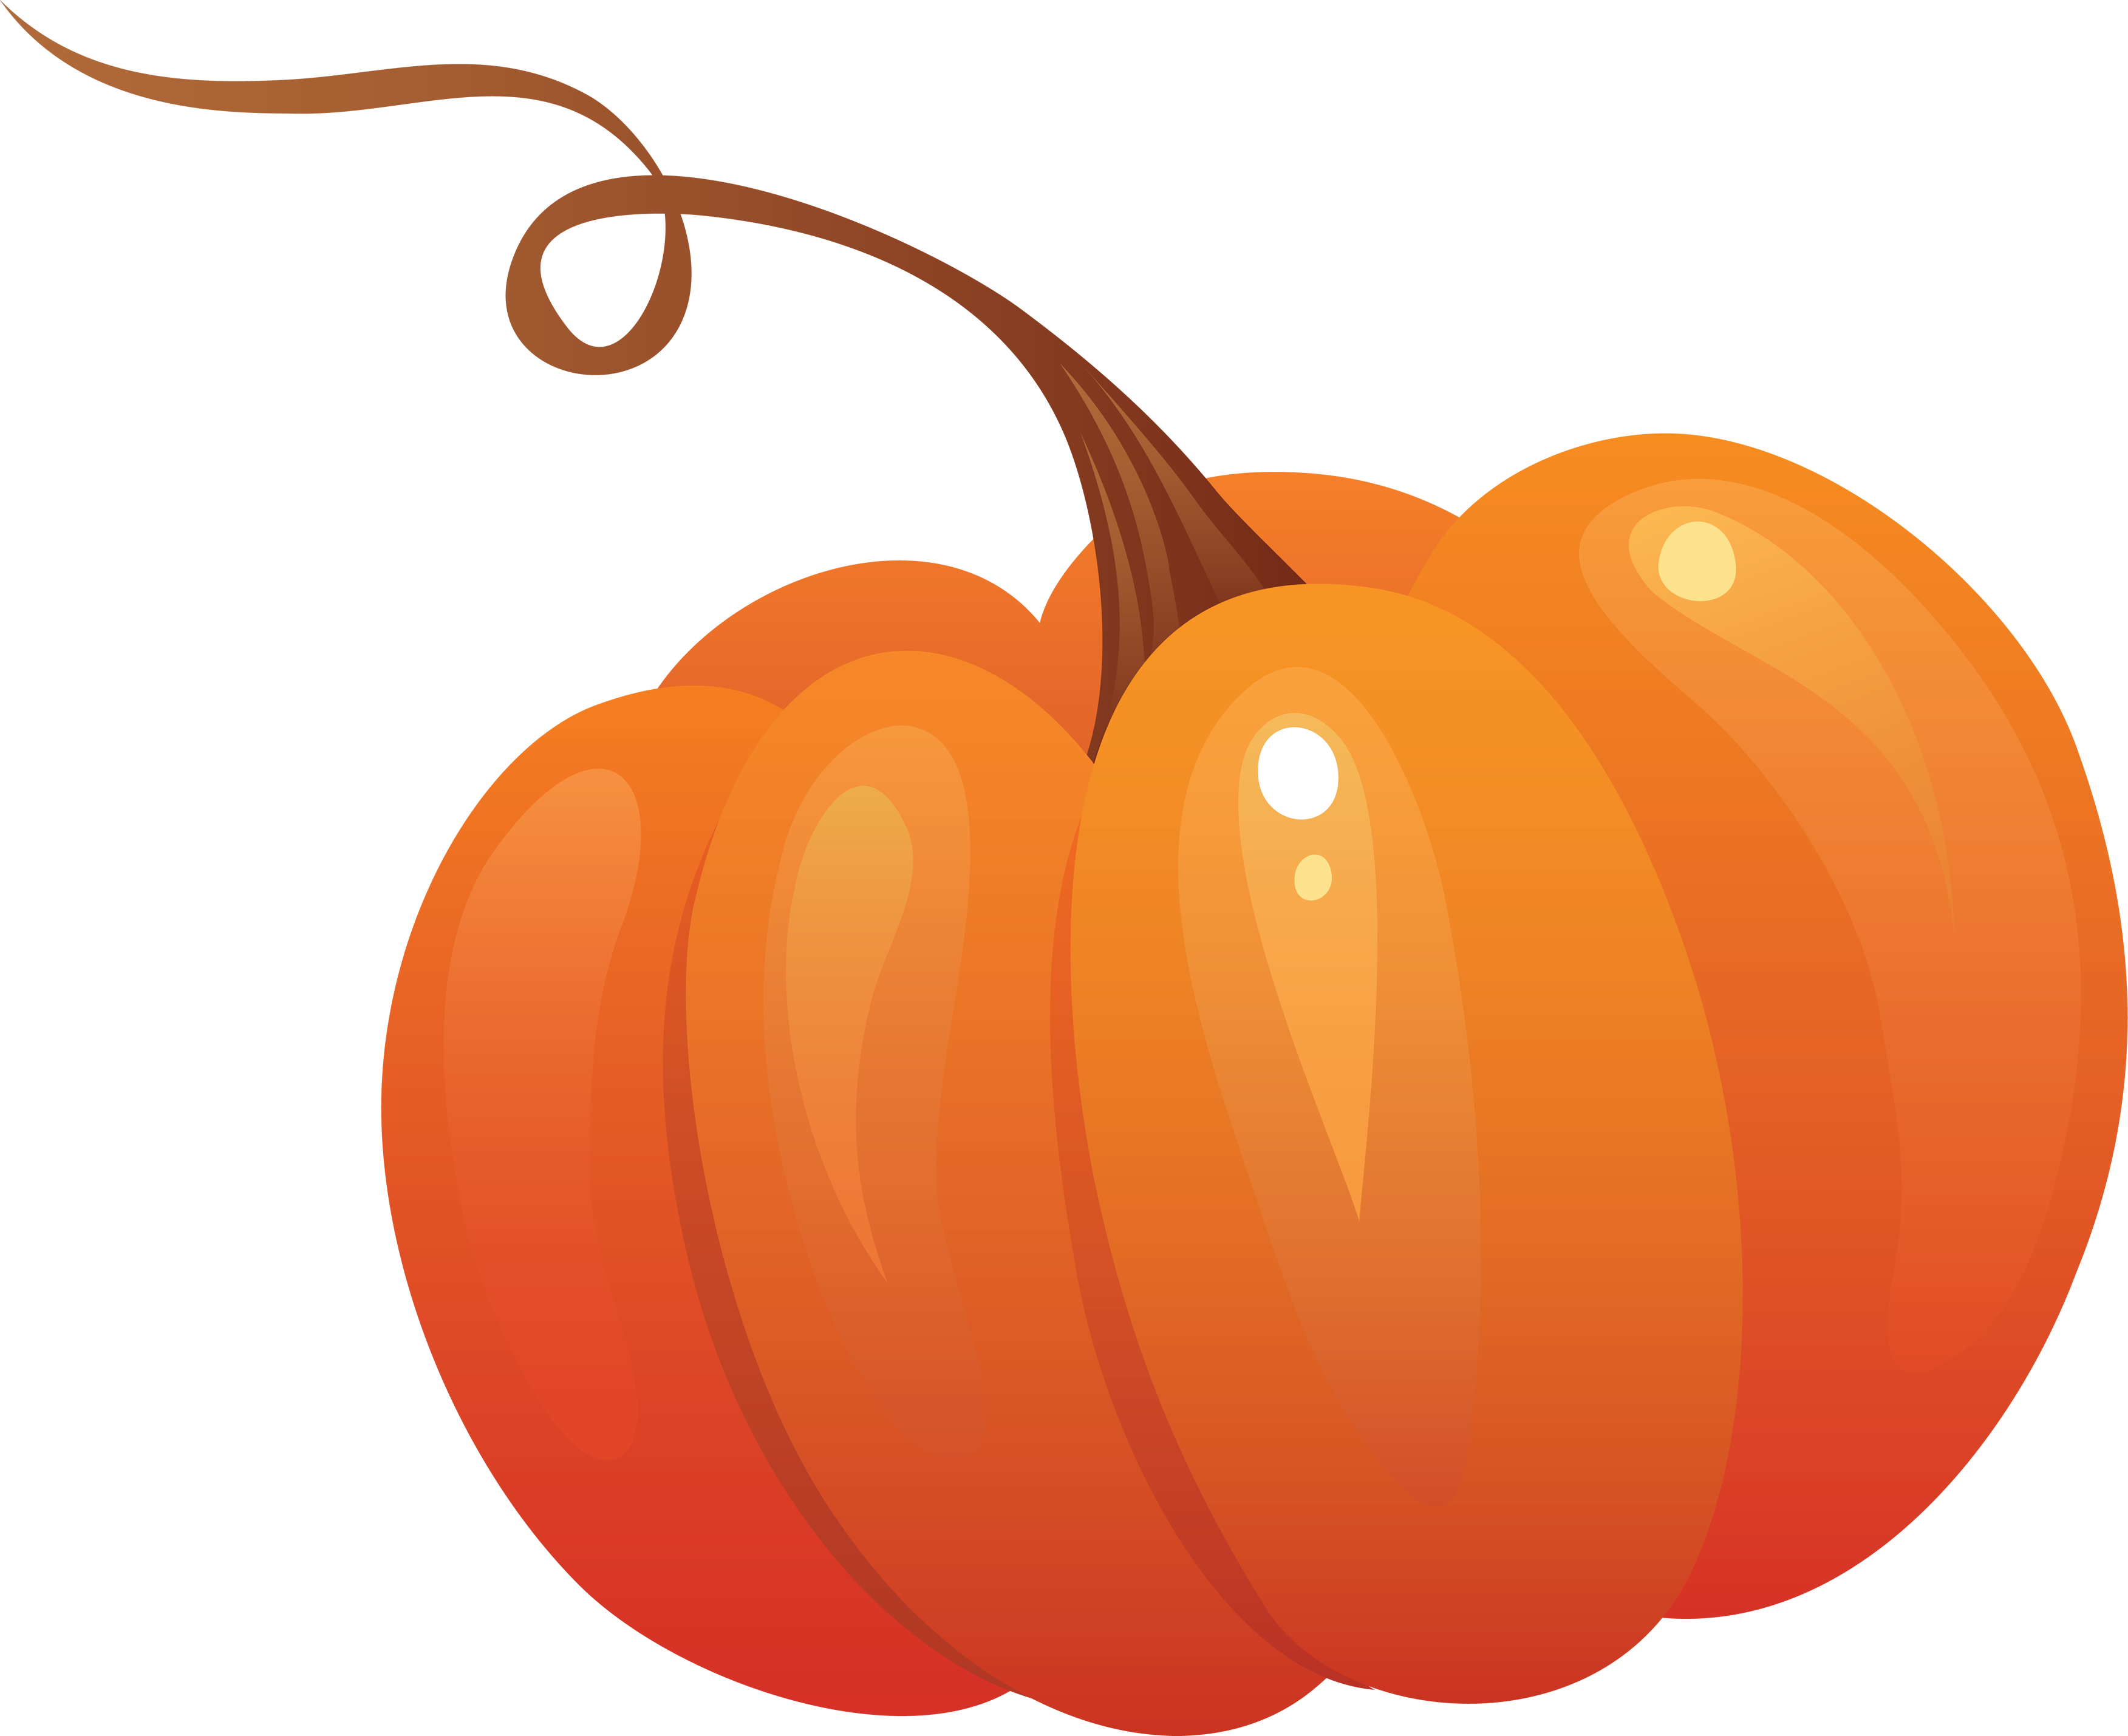 Clipart cross pumpkin, Clipart cross pumpkin Transparent FREE for.